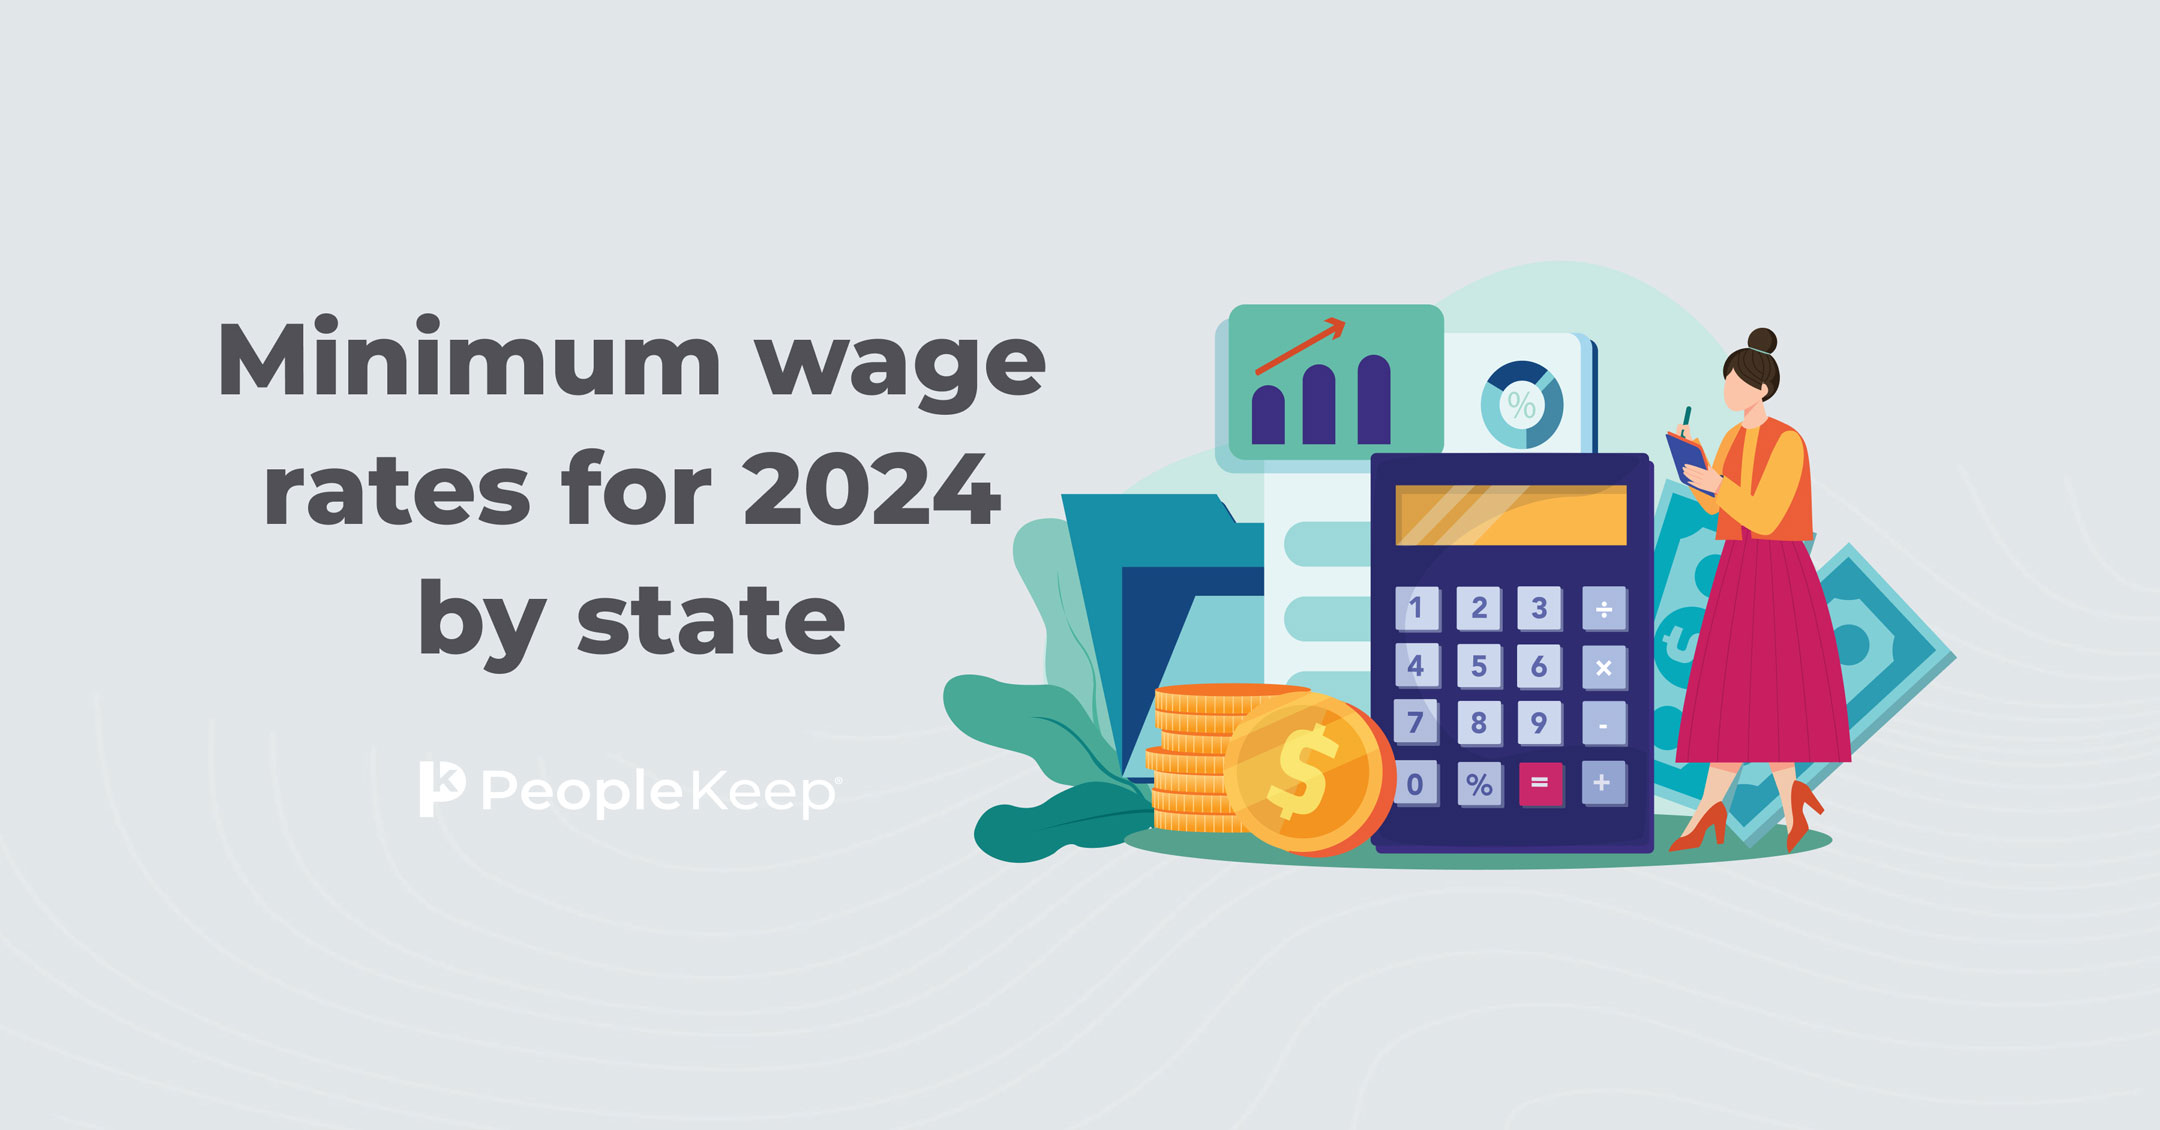 Minimum wage rates for 2024 by state